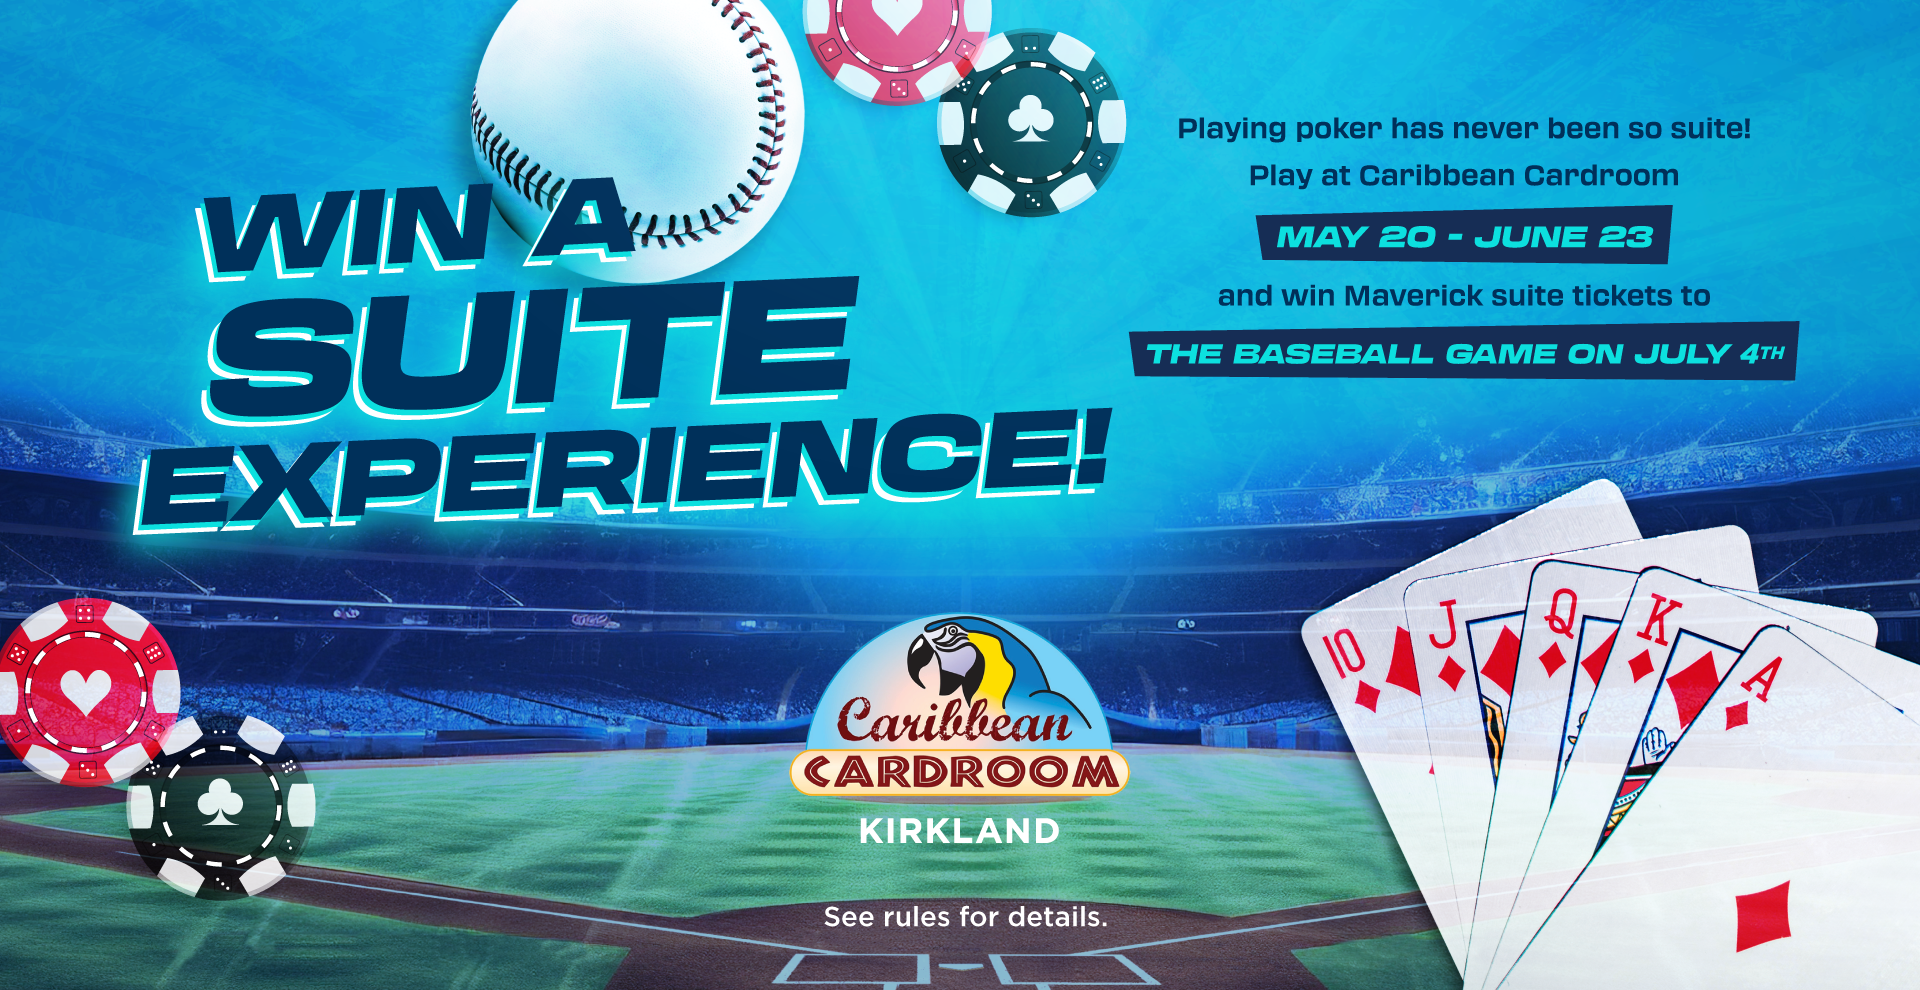 Caribbean Cardroom Poker | Win a Suite Experience